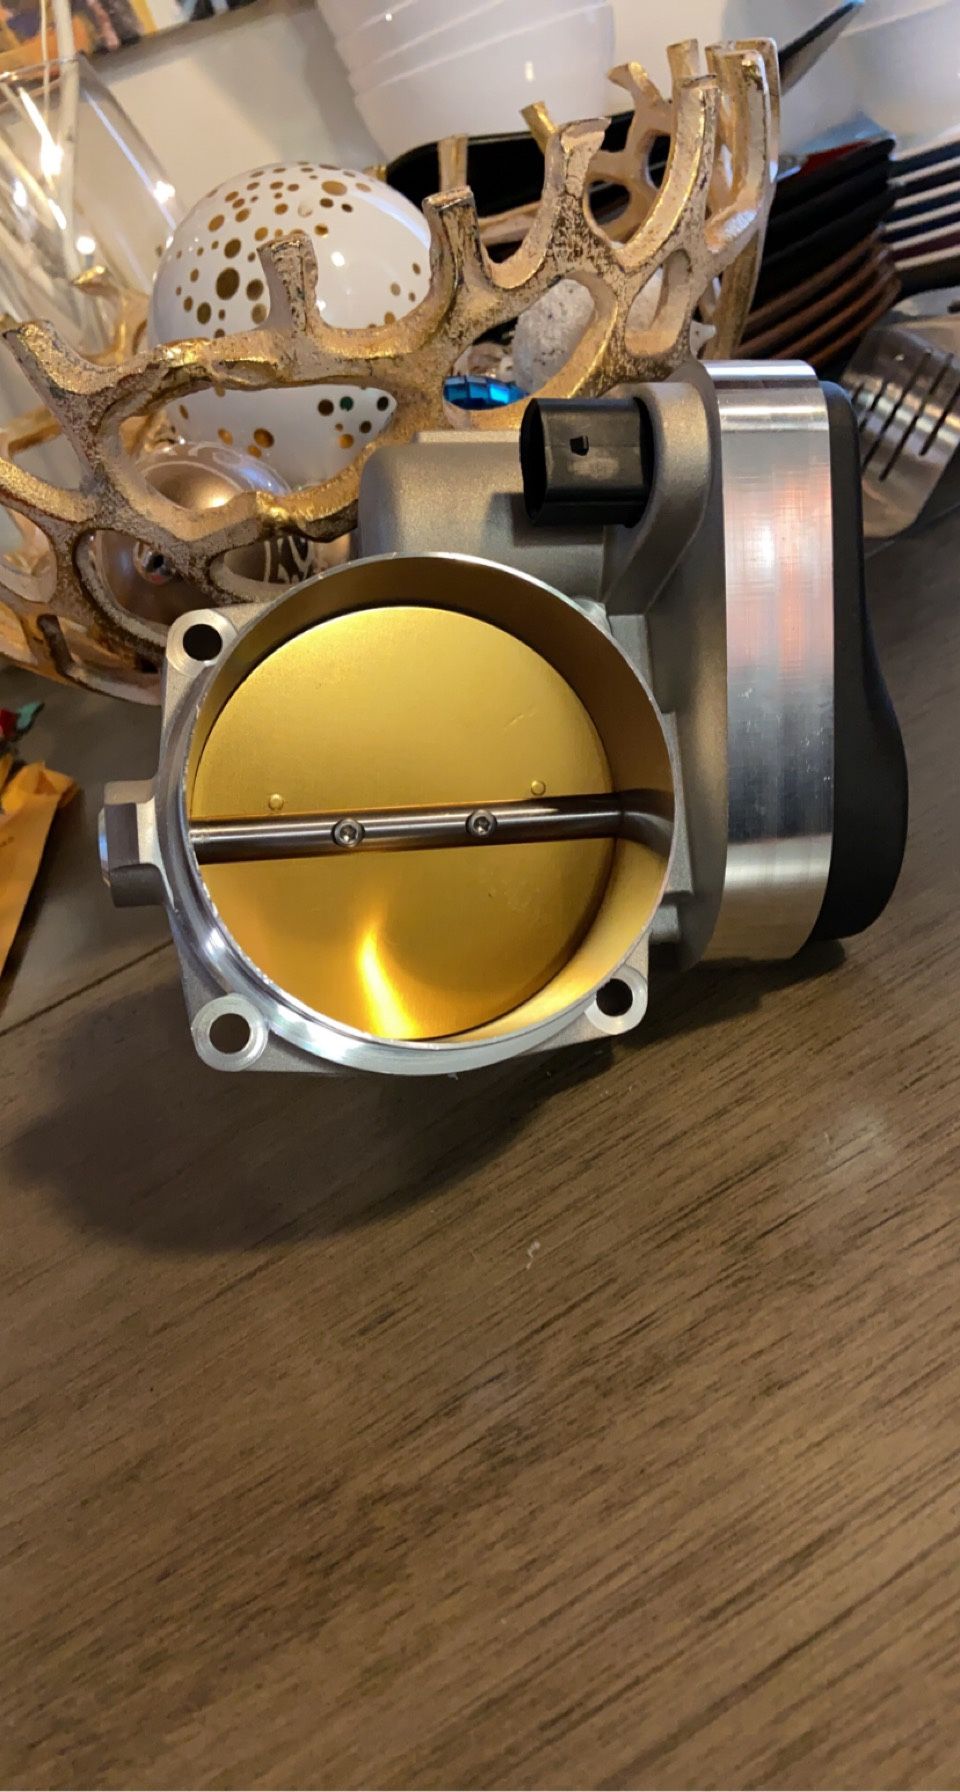 90mm Enlarged Throttle Body Air Control Assembly